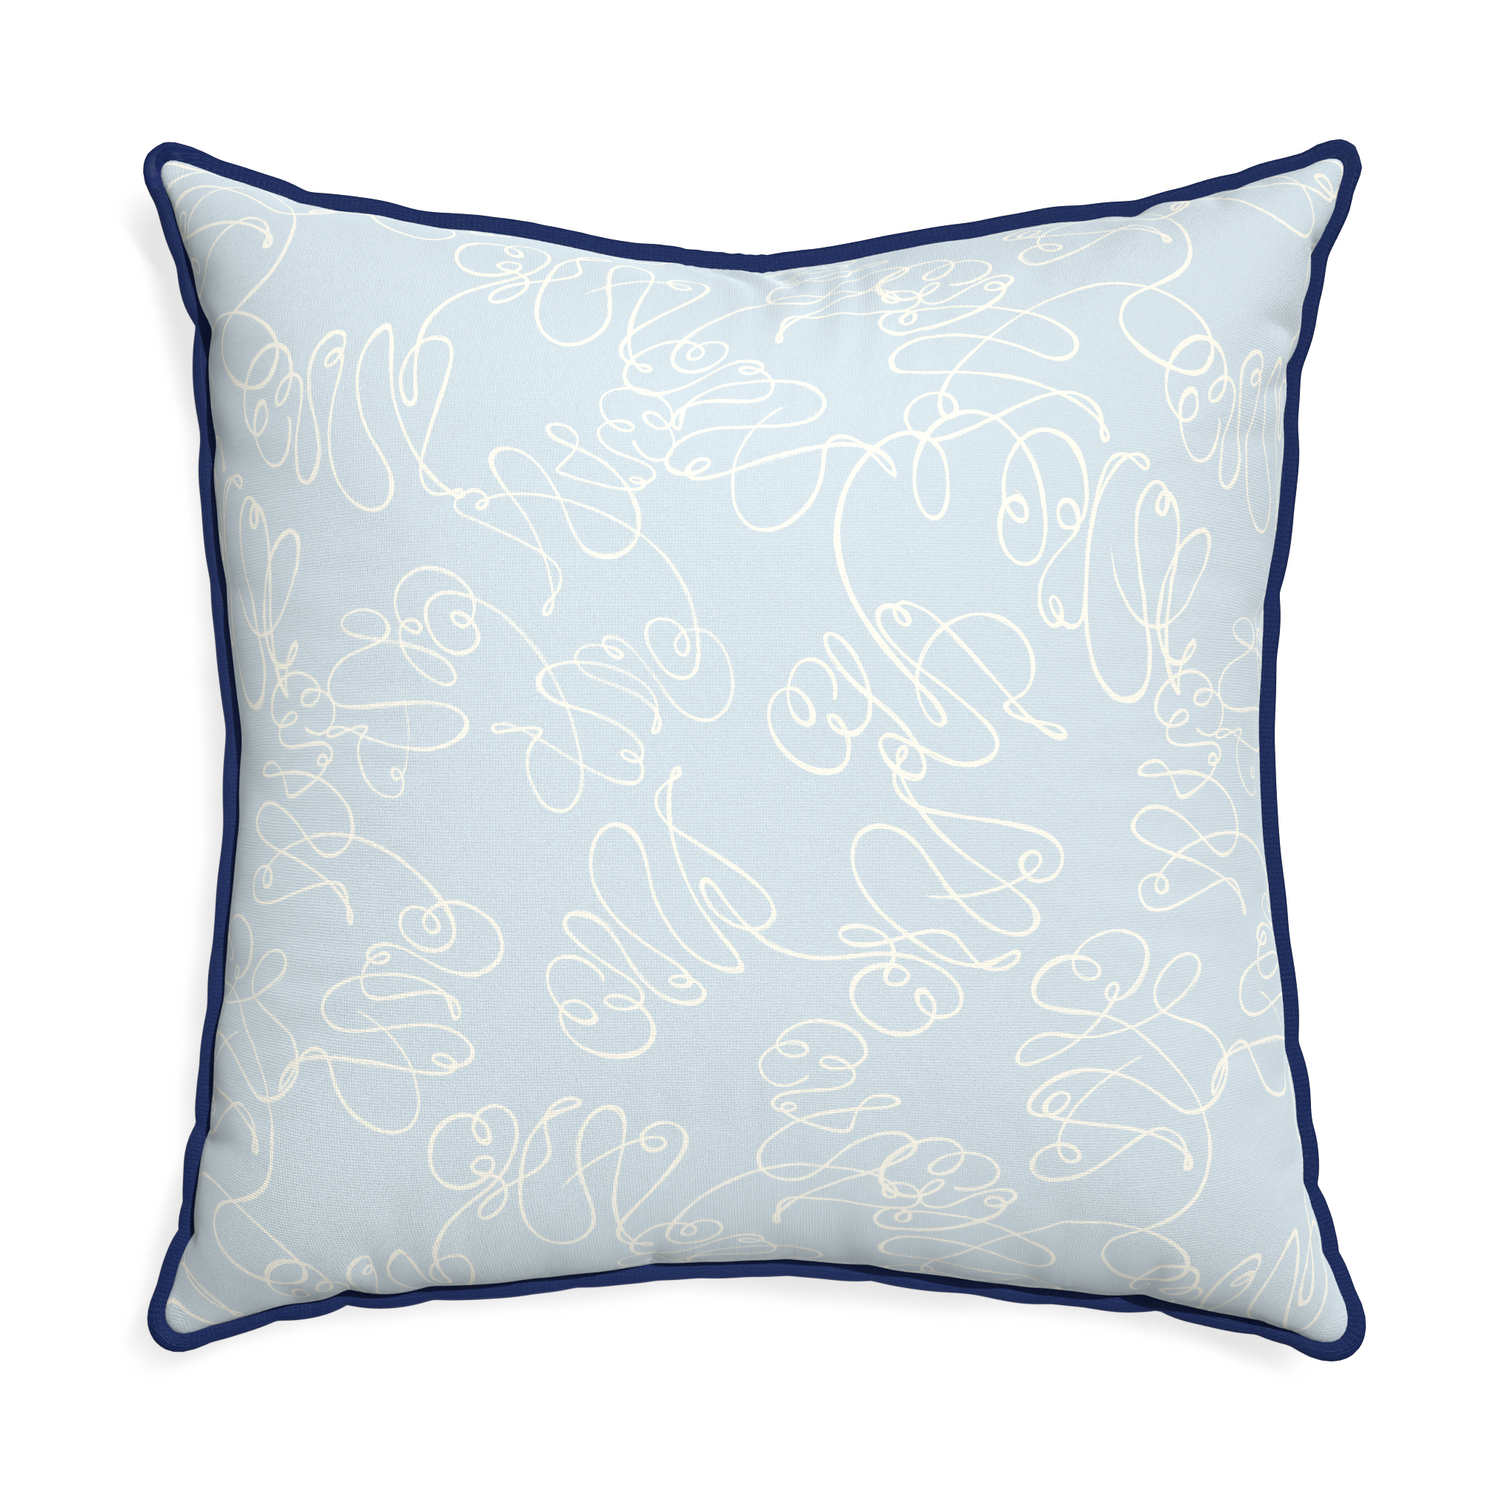 Euro-sham mirabella custom powder blue abstractpillow with midnight piping on white background